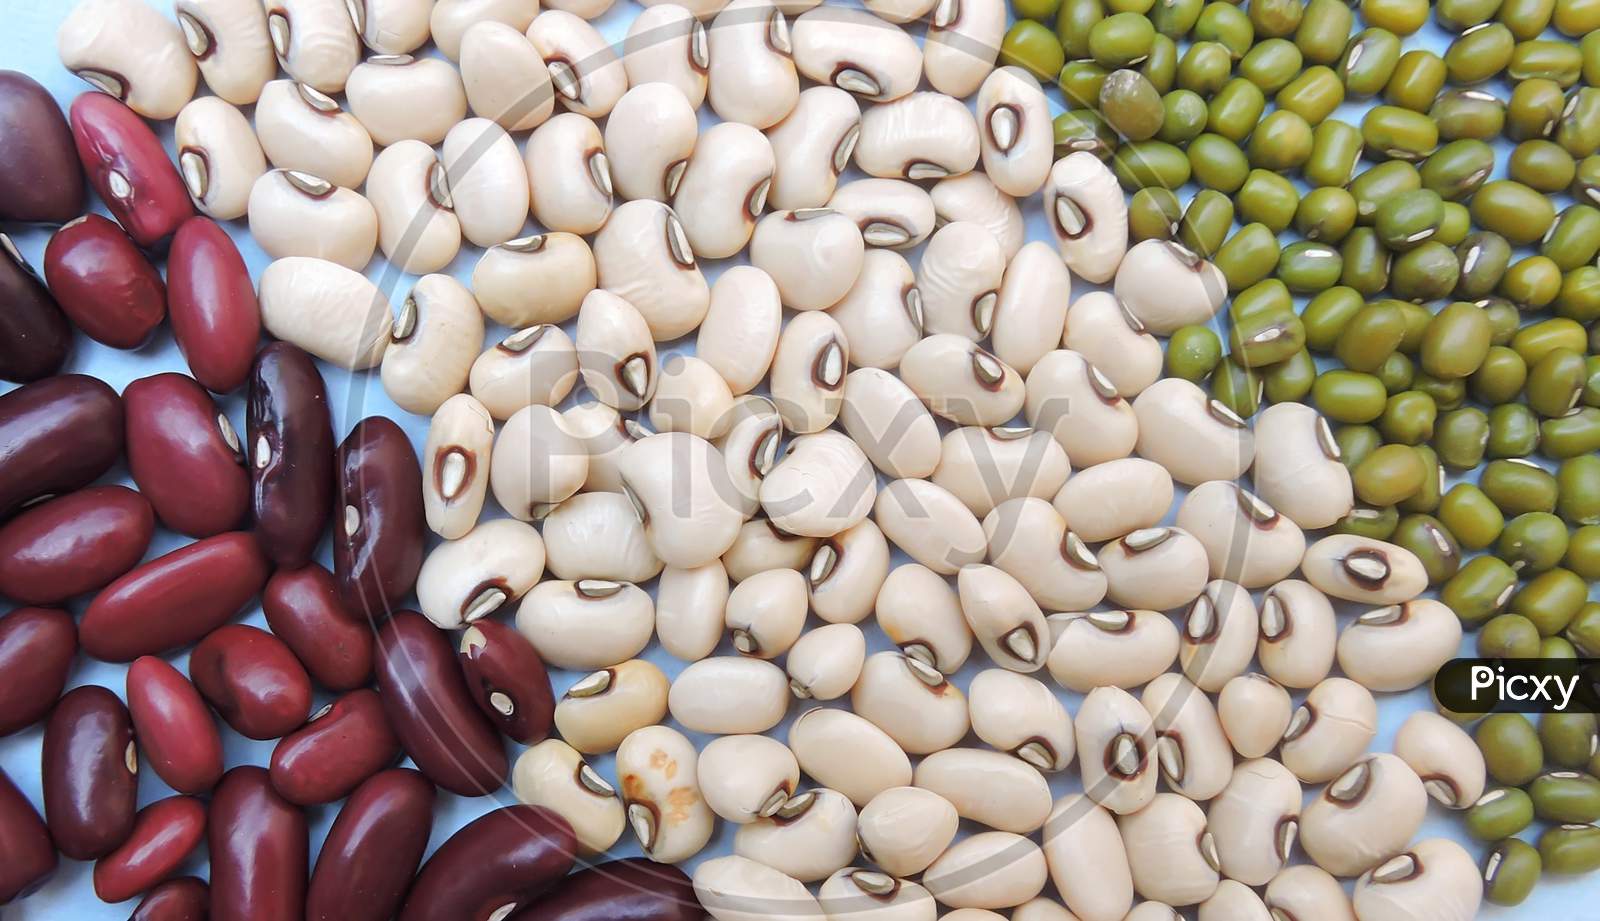 Three widely consumed beans in India